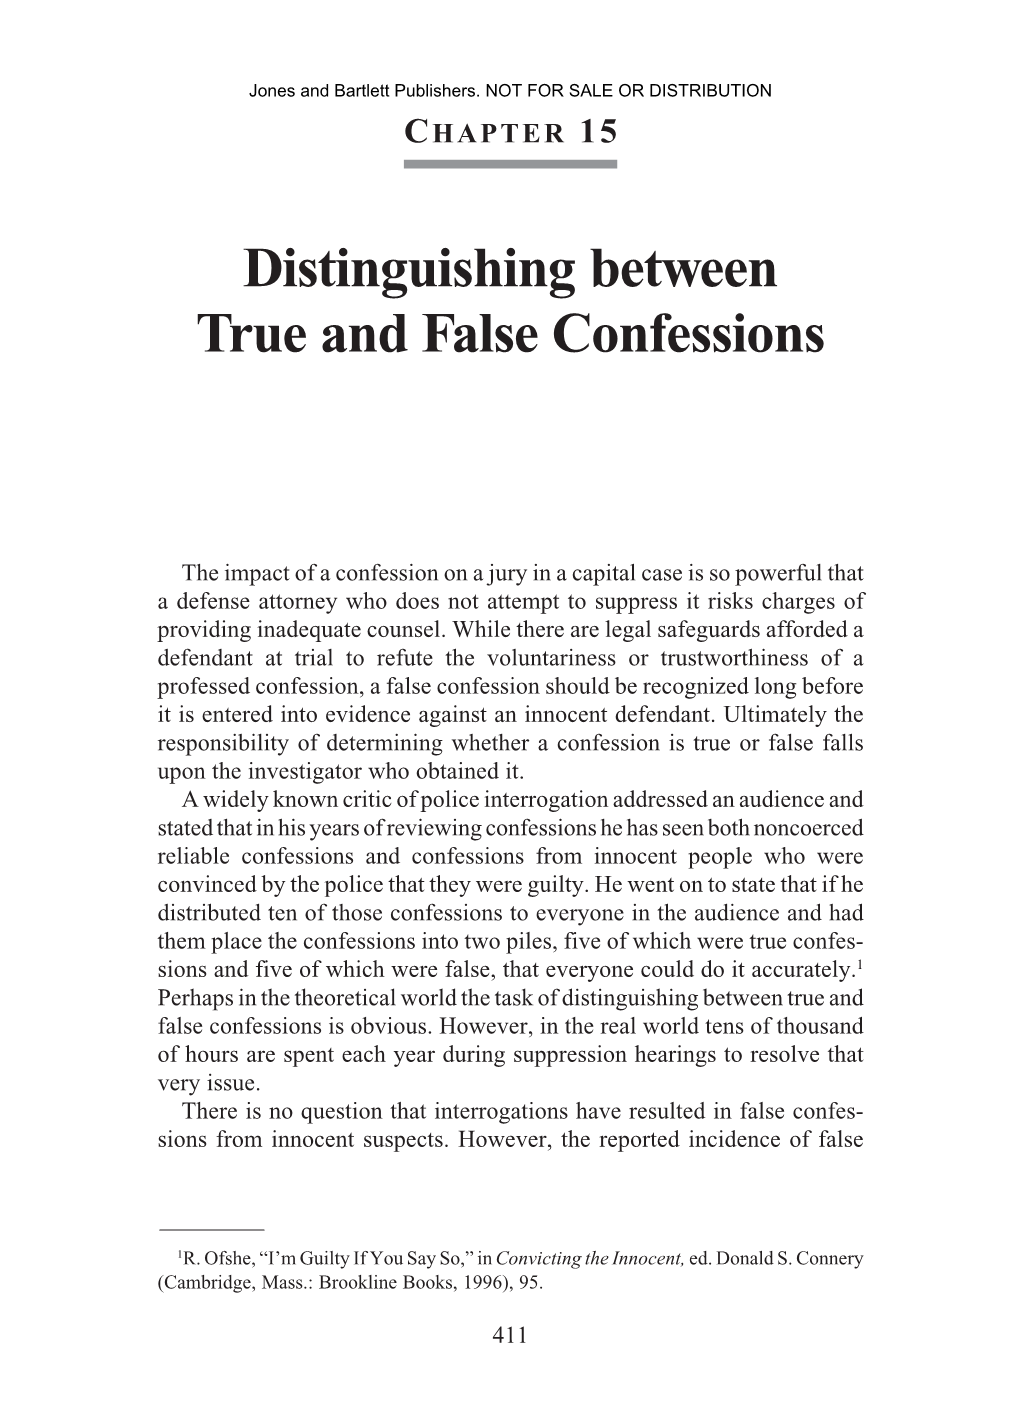 To Access Chapter 15, Distinguishing Between True and False